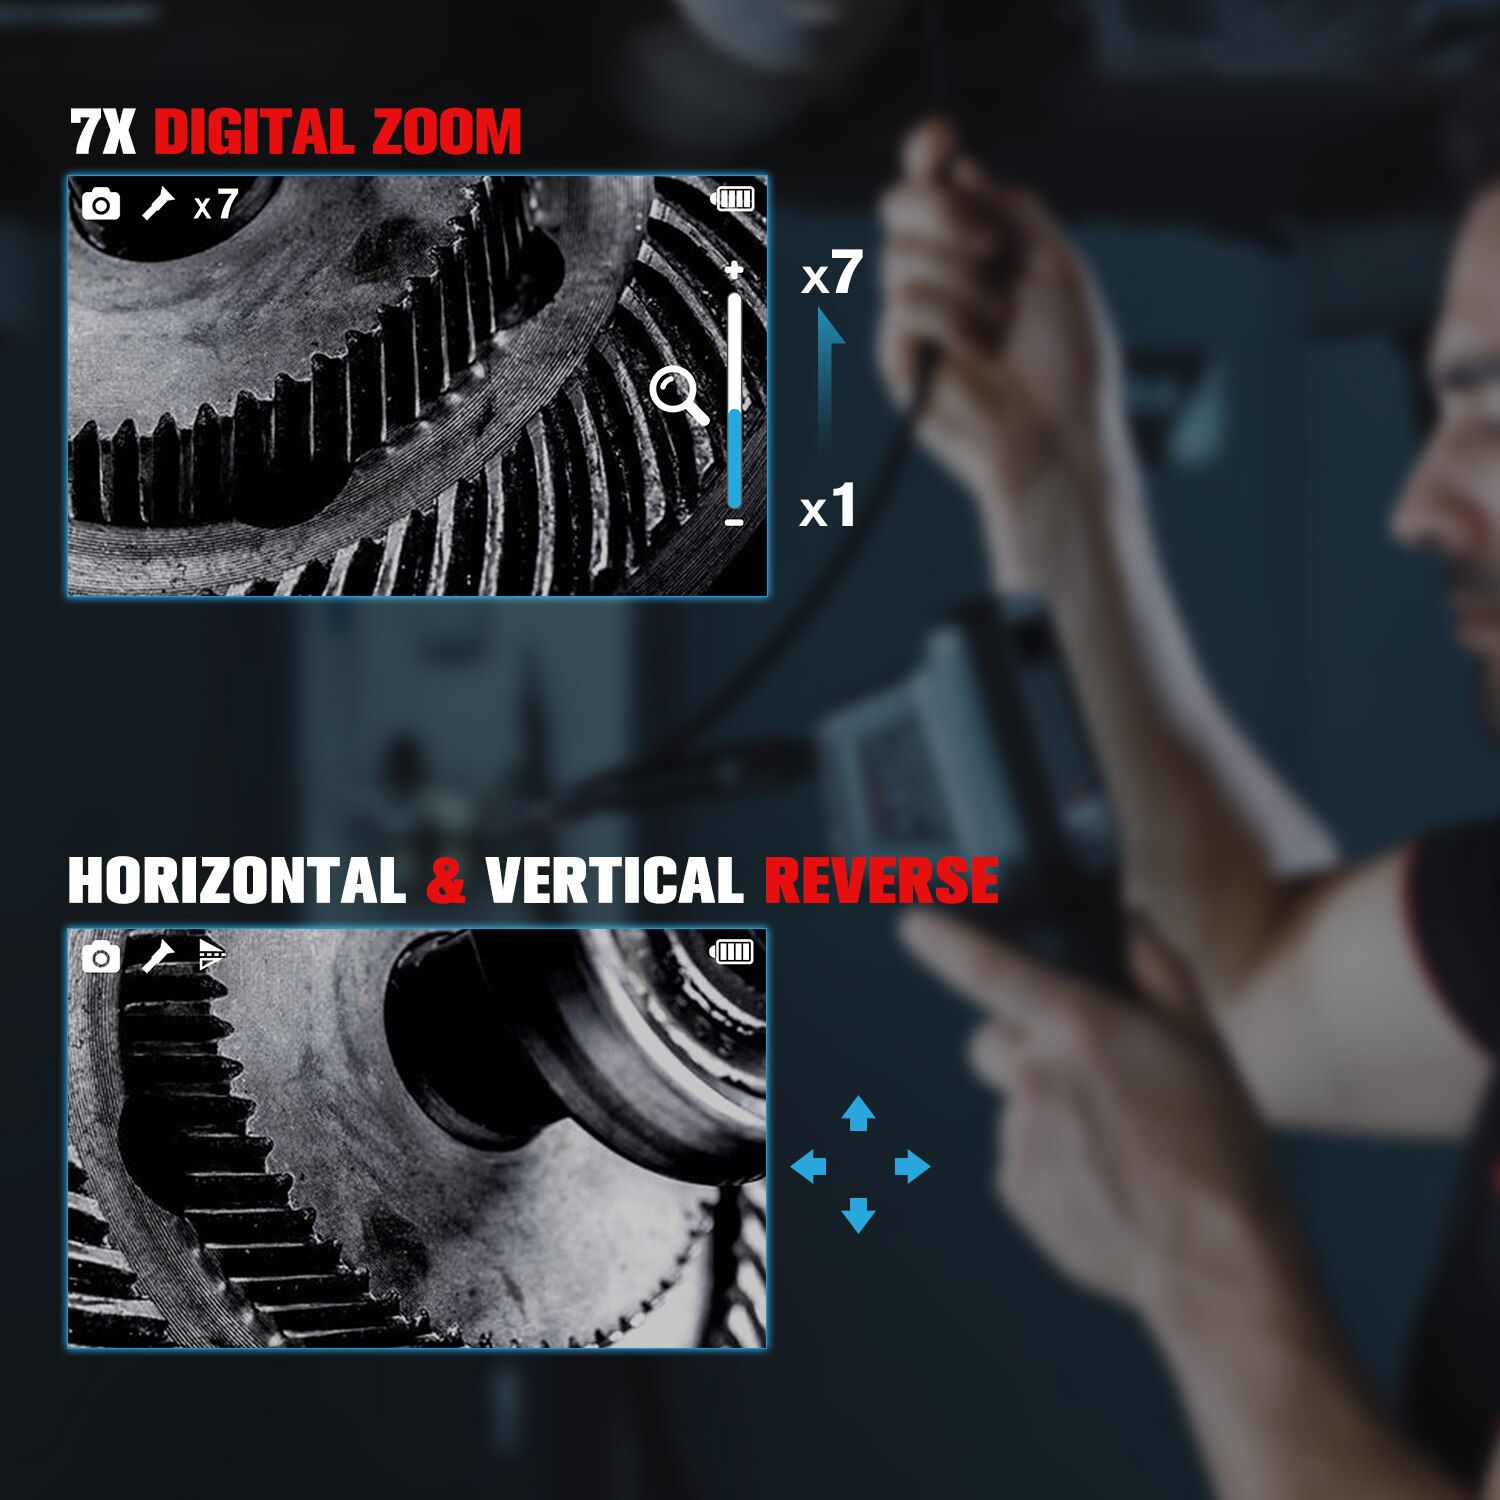 Autel MV480 Industrial Endoscope/Borescope,Dual Lens 8,5mm Inspection Camera with 7X Zoom,2MP,a Waterproof Cable,for Car/Wall